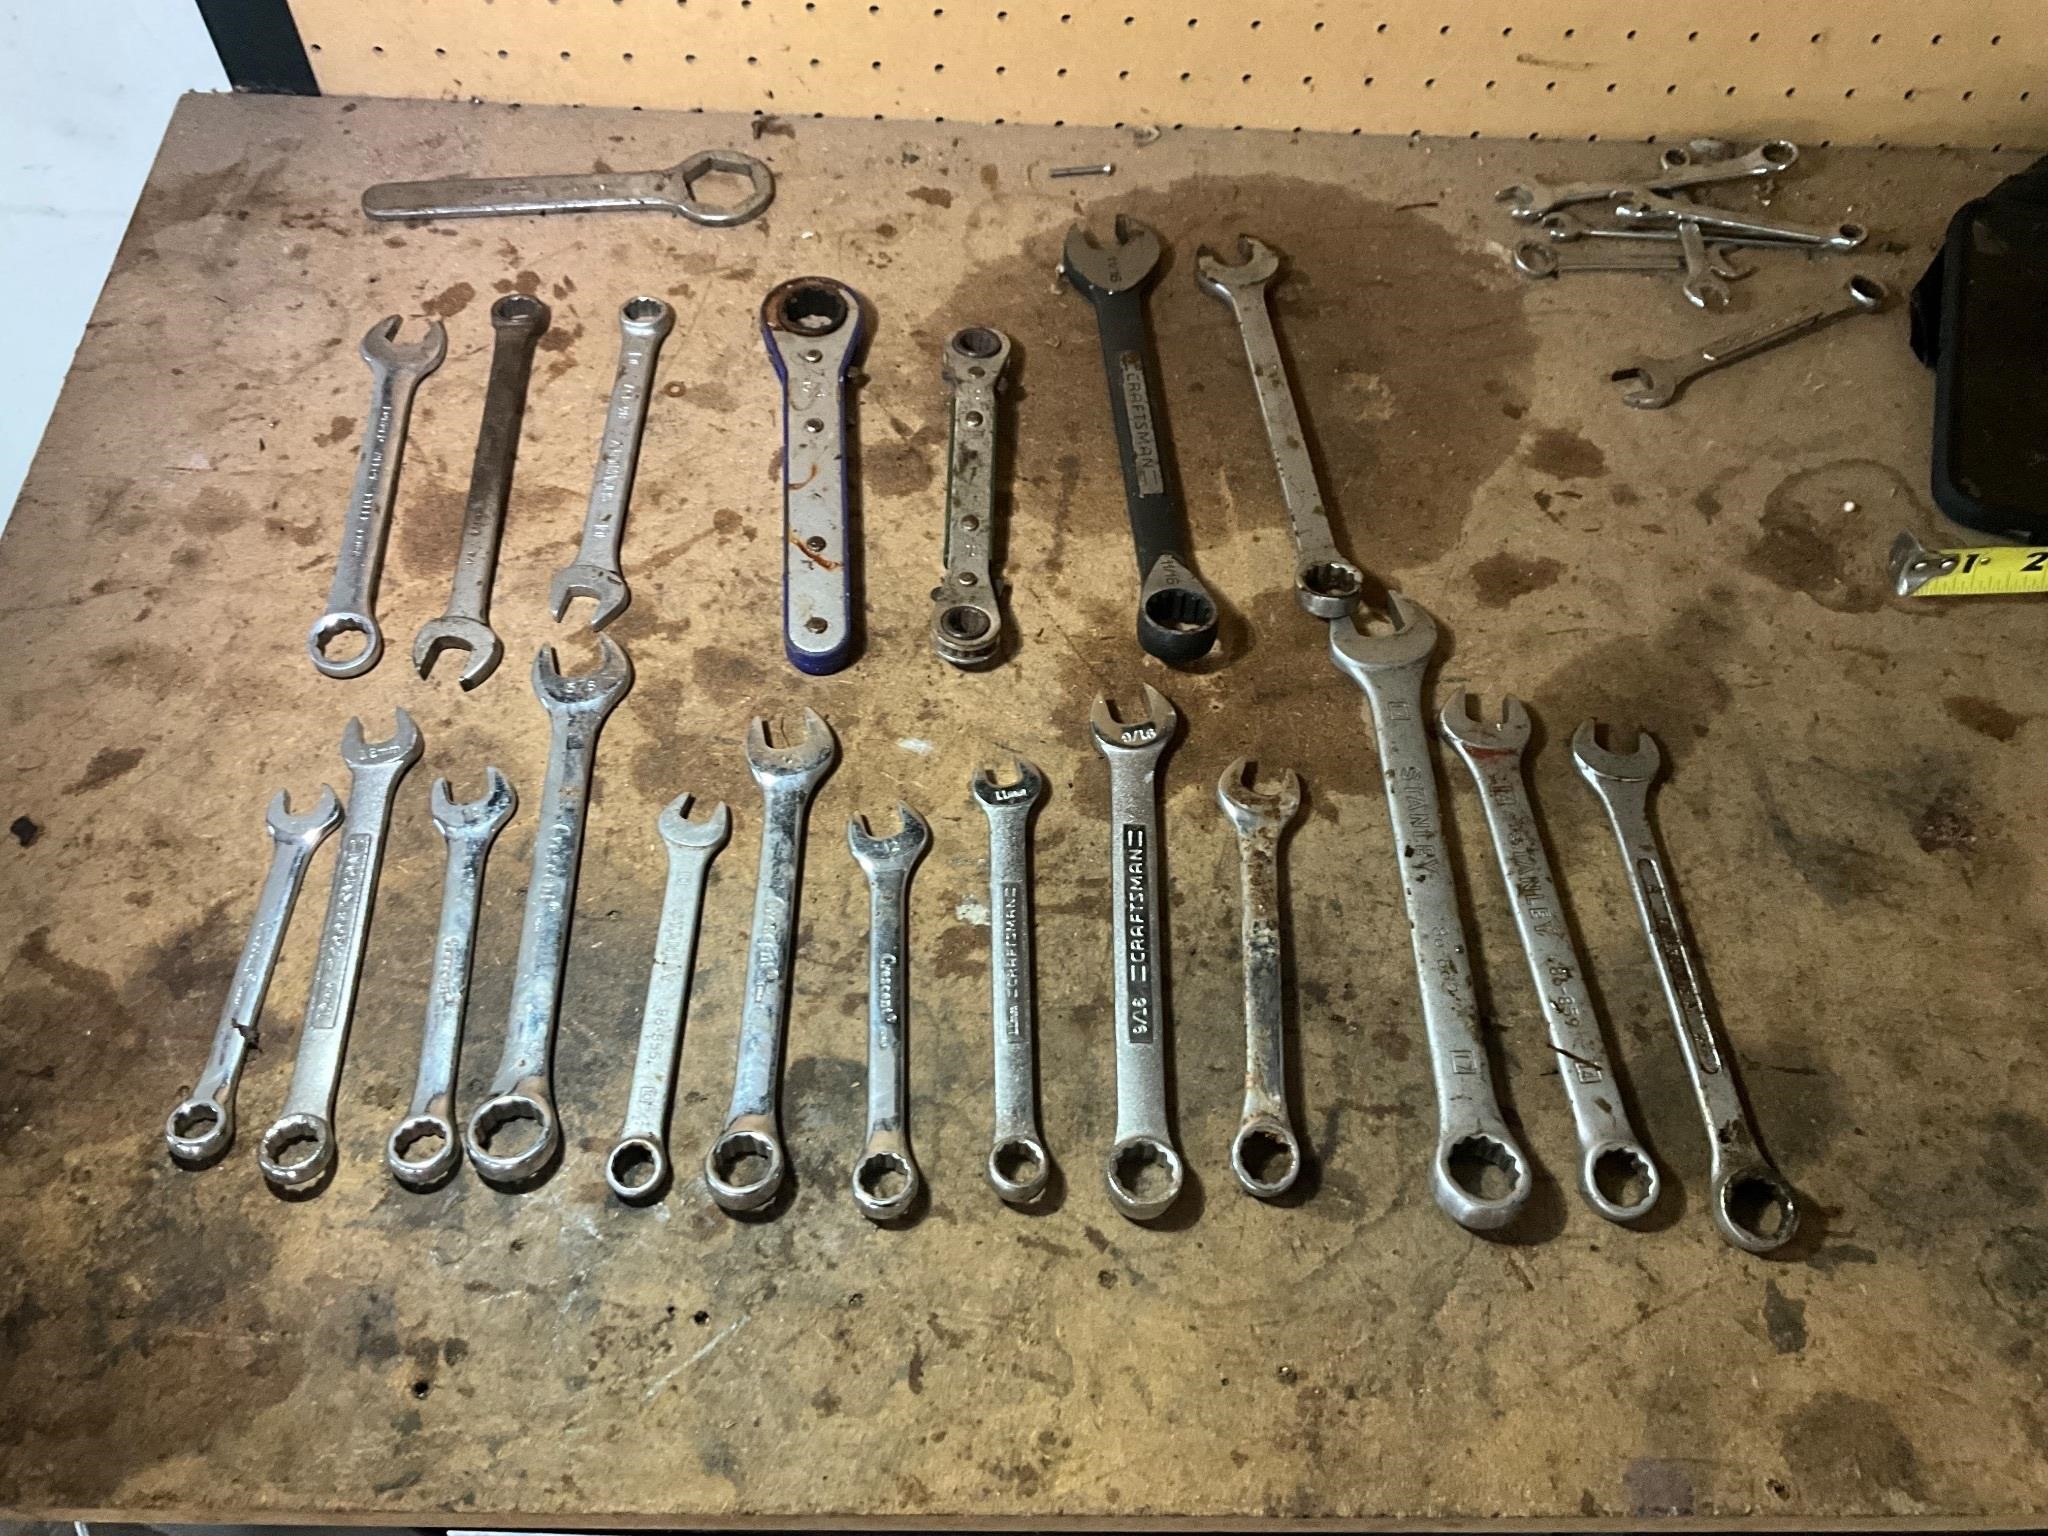 20 assorted wrenches